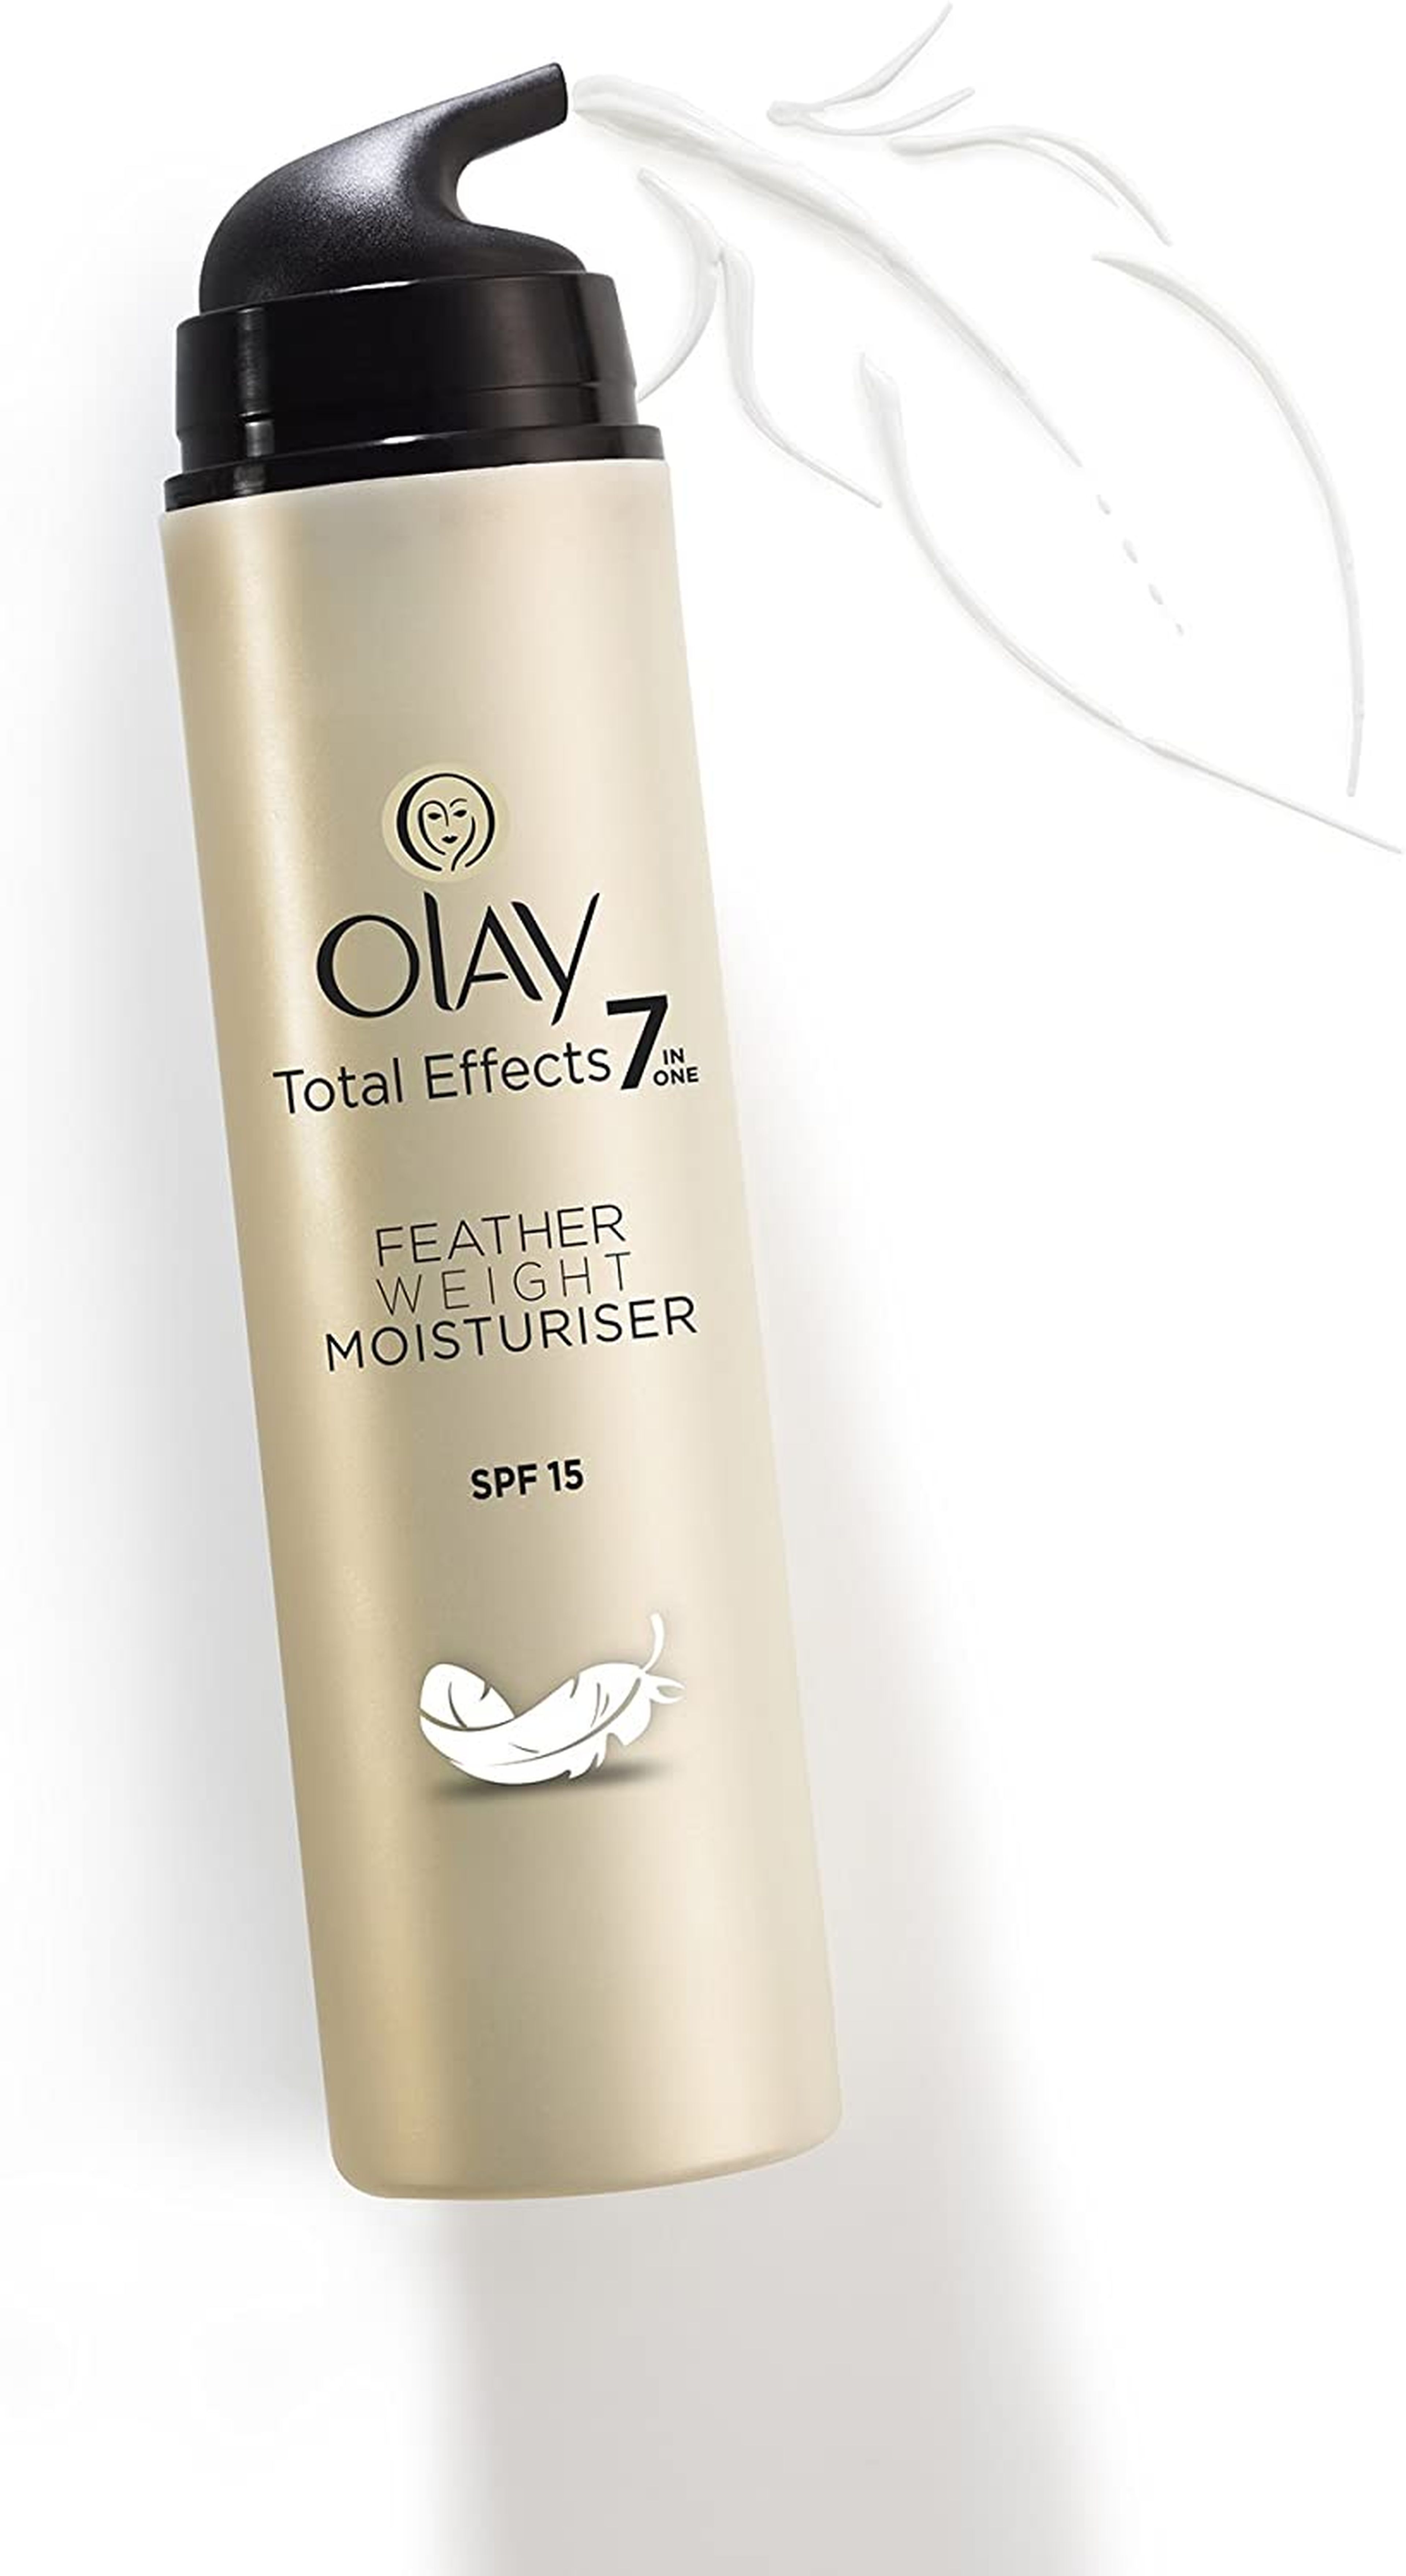 Olay total effects